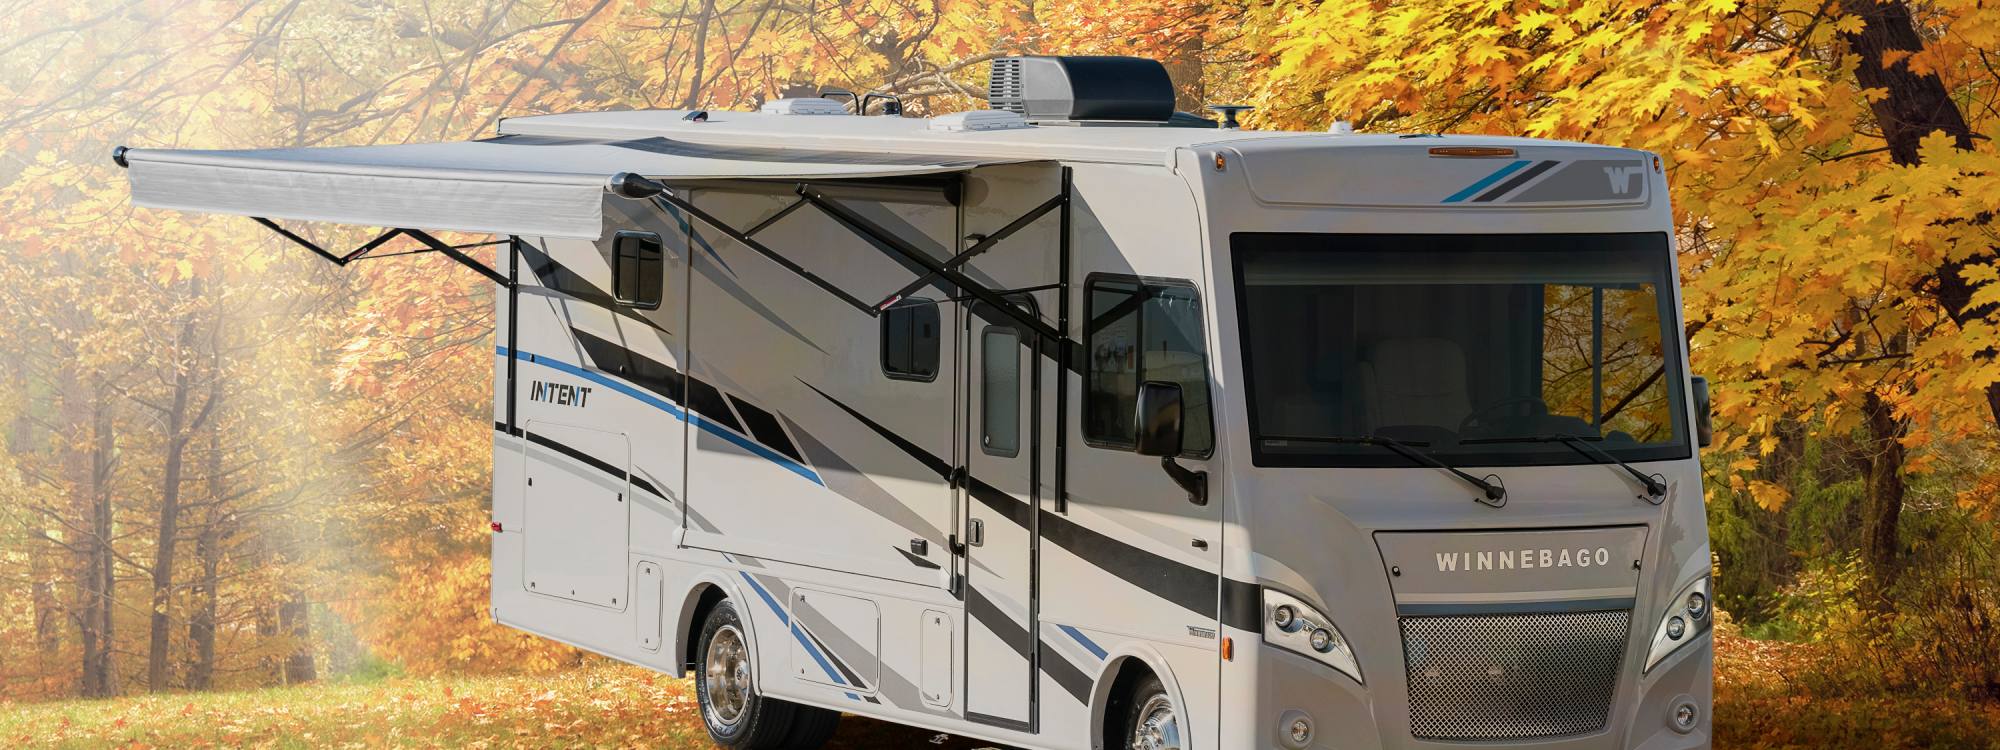 Winnebago Intent exterior with awning fully extended, parked in a wooded area during autumn